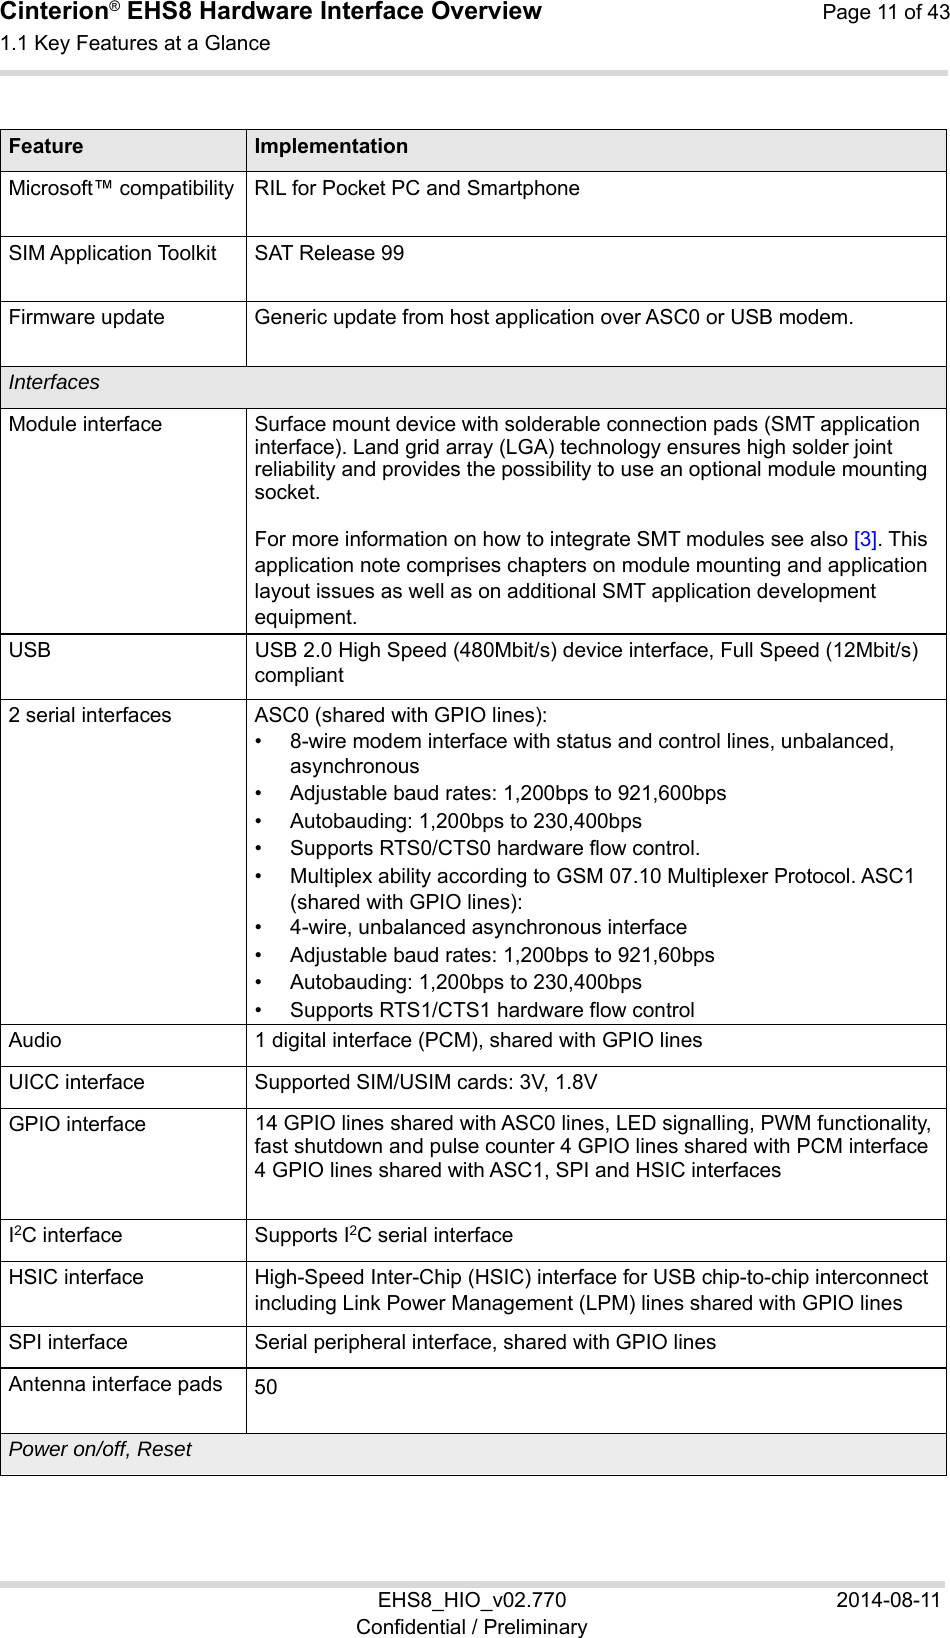 Cinterion® EHS8 Hardware Interface Overview  Page 11 of 43 1.1 Key Features at a Glance 11 EHS8_HIO_v02.770  2014-08-11 Confidential / Preliminary  Feature ImplementationMicrosoft™ compatibility RIL for Pocket PC and Smartphone SIM Application Toolkit SAT Release 99 Firmware update Generic update from host application over ASC0 or USB modem.  Interfaces Module interface Surface mount device with solderable connection pads (SMT application interface). Land grid array (LGA) technology ensures high solder joint reliability and provides the possibility to use an optional module mounting socket. For more information on how to integrate SMT modules see also [3]. This application note comprises chapters on module mounting and application layout issues as well as on additional SMT application development equipment. USB USB 2.0 High Speed (480Mbit/s) device interface, Full Speed (12Mbit/s) compliant 2 serial interfaces  ASC0 (shared with GPIO lines):•  8-wire modem interface with status and control lines, unbalanced, asynchronous •  Adjustable baud rates: 1,200bps to 921,600bps •  Autobauding: 1,200bps to 230,400bps •  Supports RTS0/CTS0 hardware flow control. •  Multiplex ability according to GSM 07.10 Multiplexer Protocol. ASC1 (shared with GPIO lines): •  4-wire, unbalanced asynchronous interface •  Adjustable baud rates: 1,200bps to 921,60bps •  Autobauding: 1,200bps to 230,400bps •  Supports RTS1/CTS1 hardware flow control Audio 1 digital interface (PCM), shared with GPIO linesUICC interface Supported SIM/USIM cards: 3V, 1.8V GPIO interface 14 GPIO lines shared with ASC0 lines, LED signalling, PWM functionality, fast shutdown and pulse counter 4 GPIO lines shared with PCM interface4 GPIO lines shared with ASC1, SPI and HSIC interfaces I2C interface Supports I2C serial interfaceHSIC interface High-Speed Inter-Chip (HSIC) interface for USB chip-to-chip interconnect including Link Power Management (LPM) lines shared with GPIO lines SPI interface Serial peripheral interface, shared with GPIO linesAntenna interface pads 50　  Power on/off, Reset 